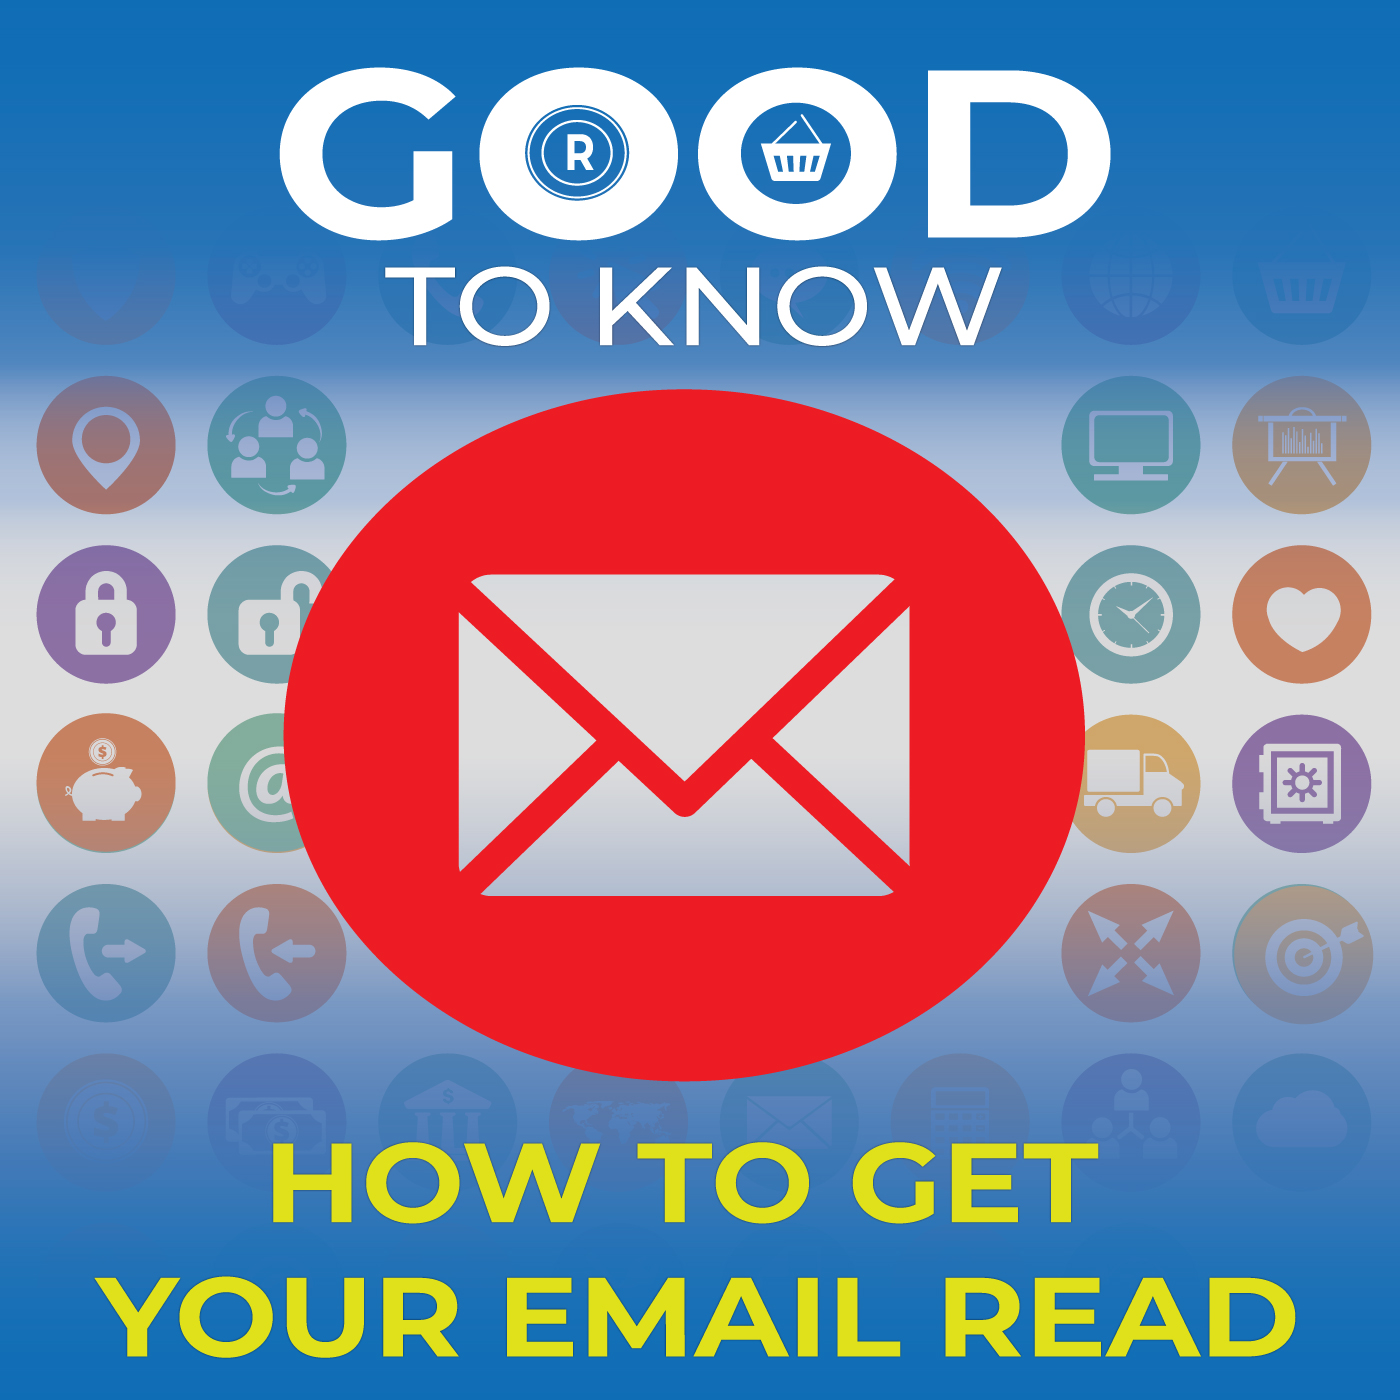 Good to Know on how to get your email read